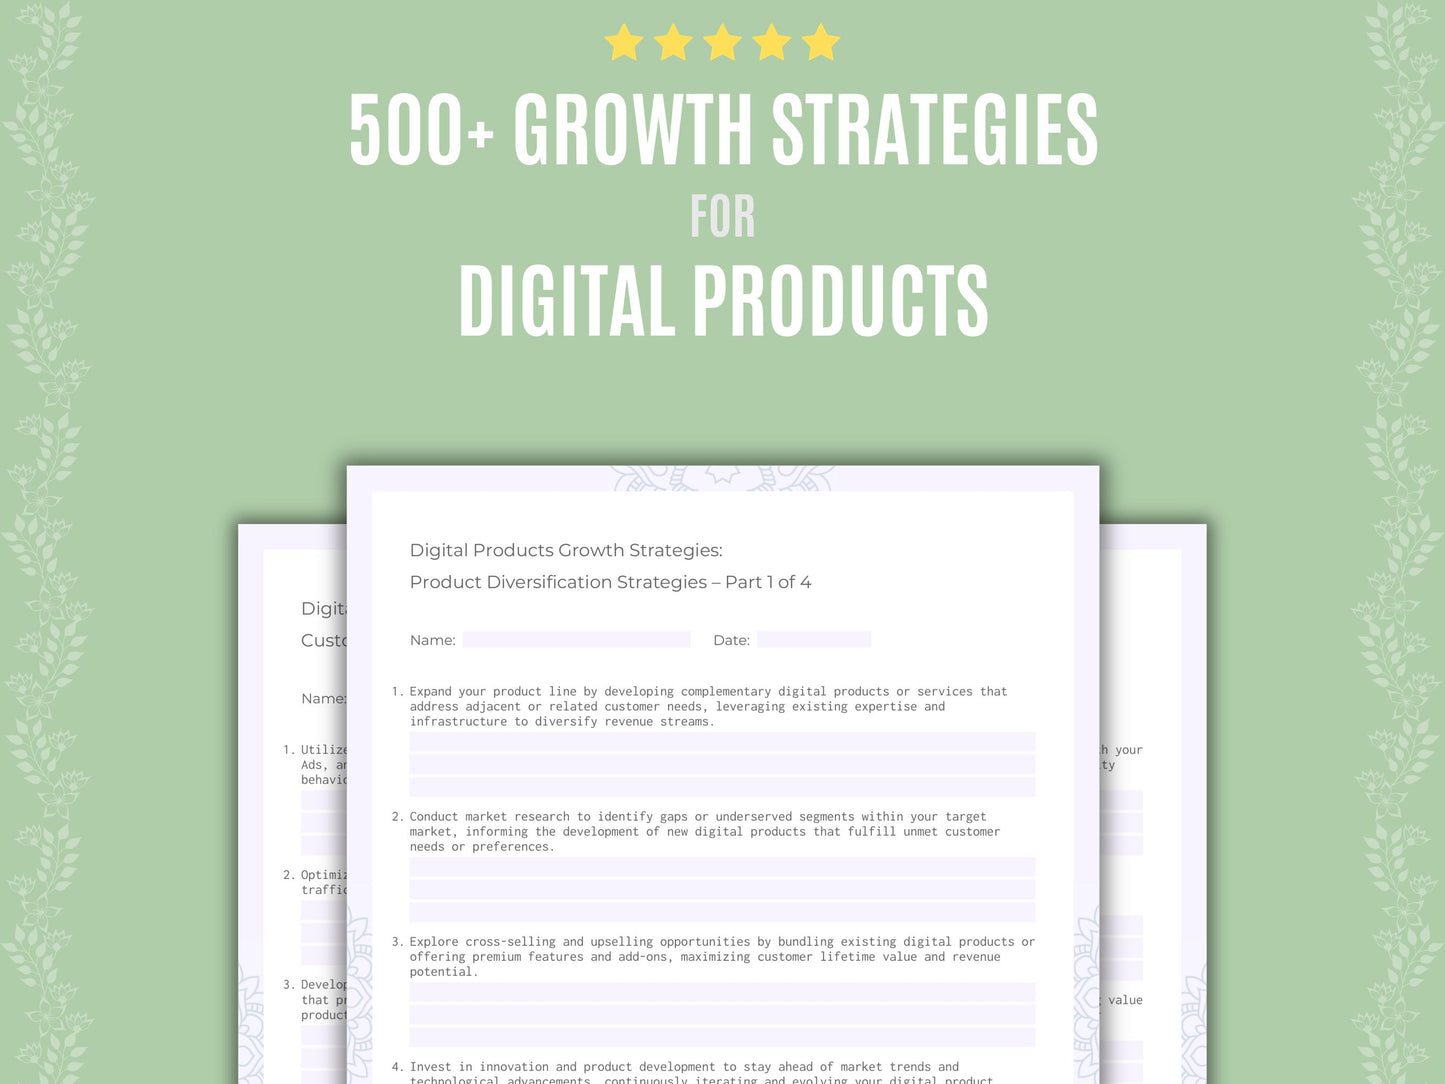 Digital Products Growth Strategies Resource